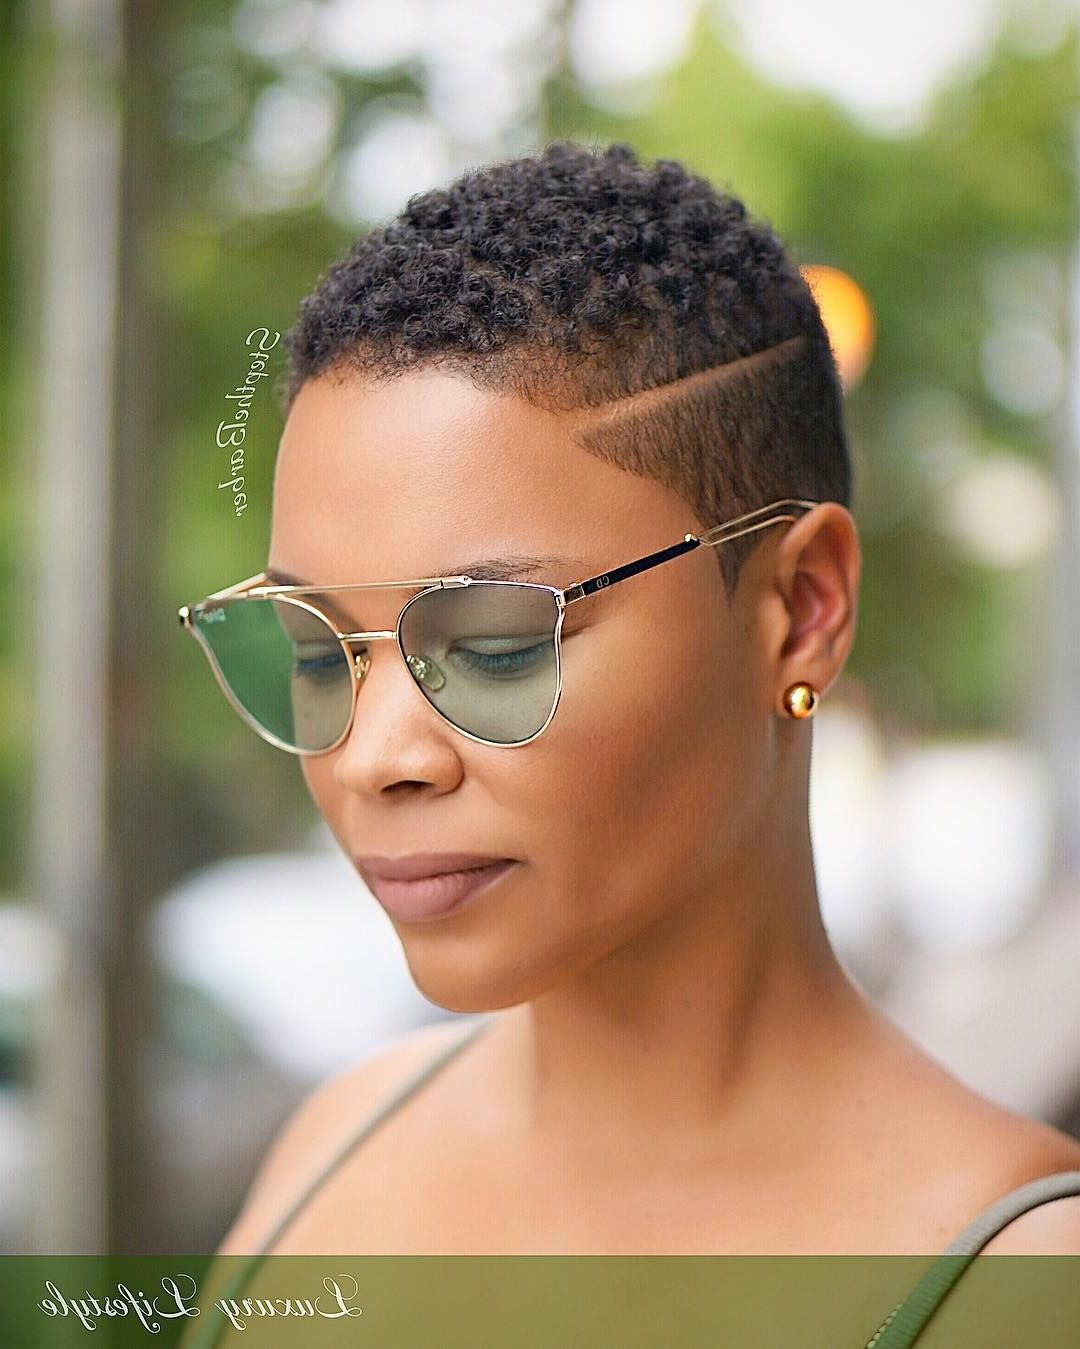 Tapered Haircut With A Disconnected Side Part. Twa, Black Woman With Regard To Short Haircuts Black Women (Photo 13 of 25)